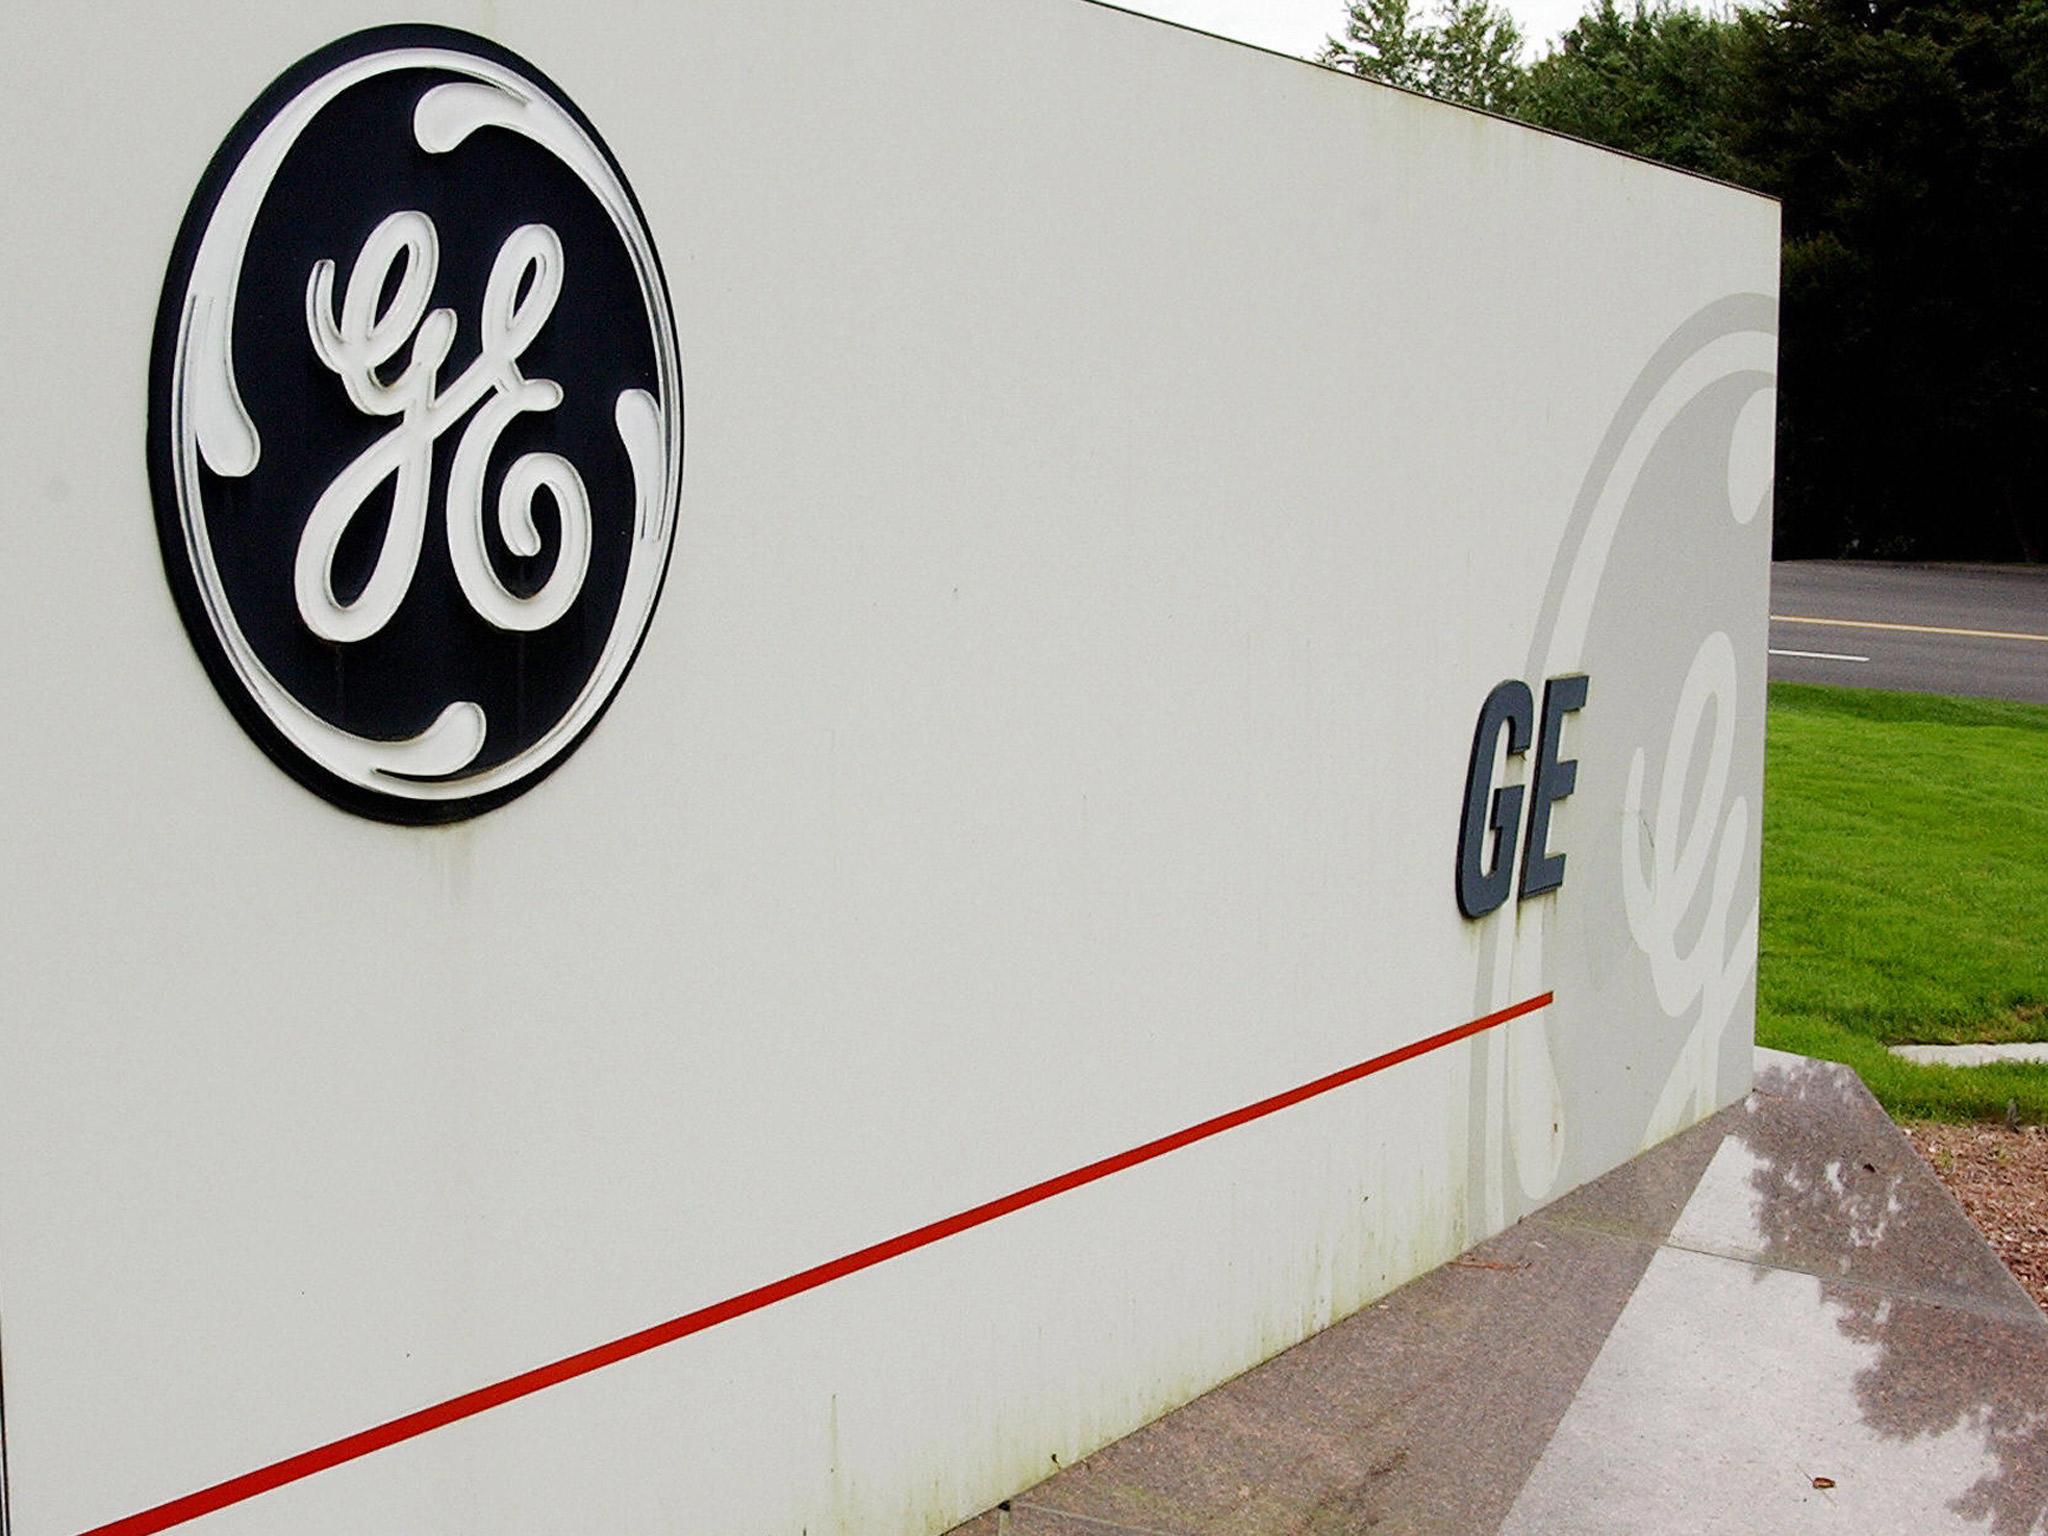 General Electric has agreed a $26.5bn (£18bn) property portfolio sale as part of a radical shake-up to concentrate on the group’s manufacturing roots